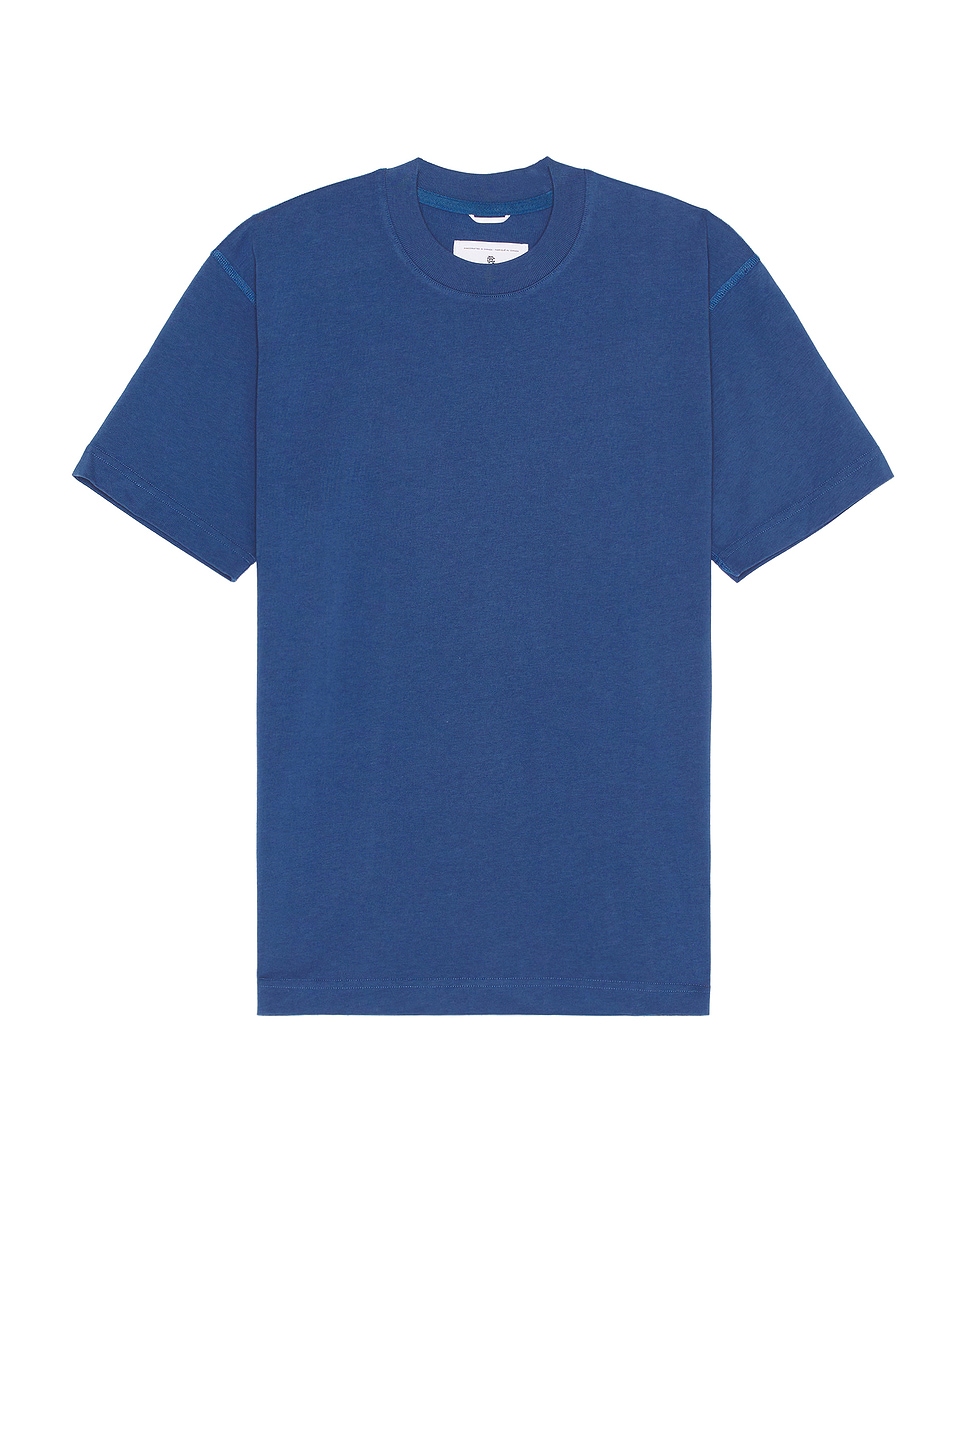 Image 1 of Reigning Champ Midweight Jersey T-shirt in Lapis